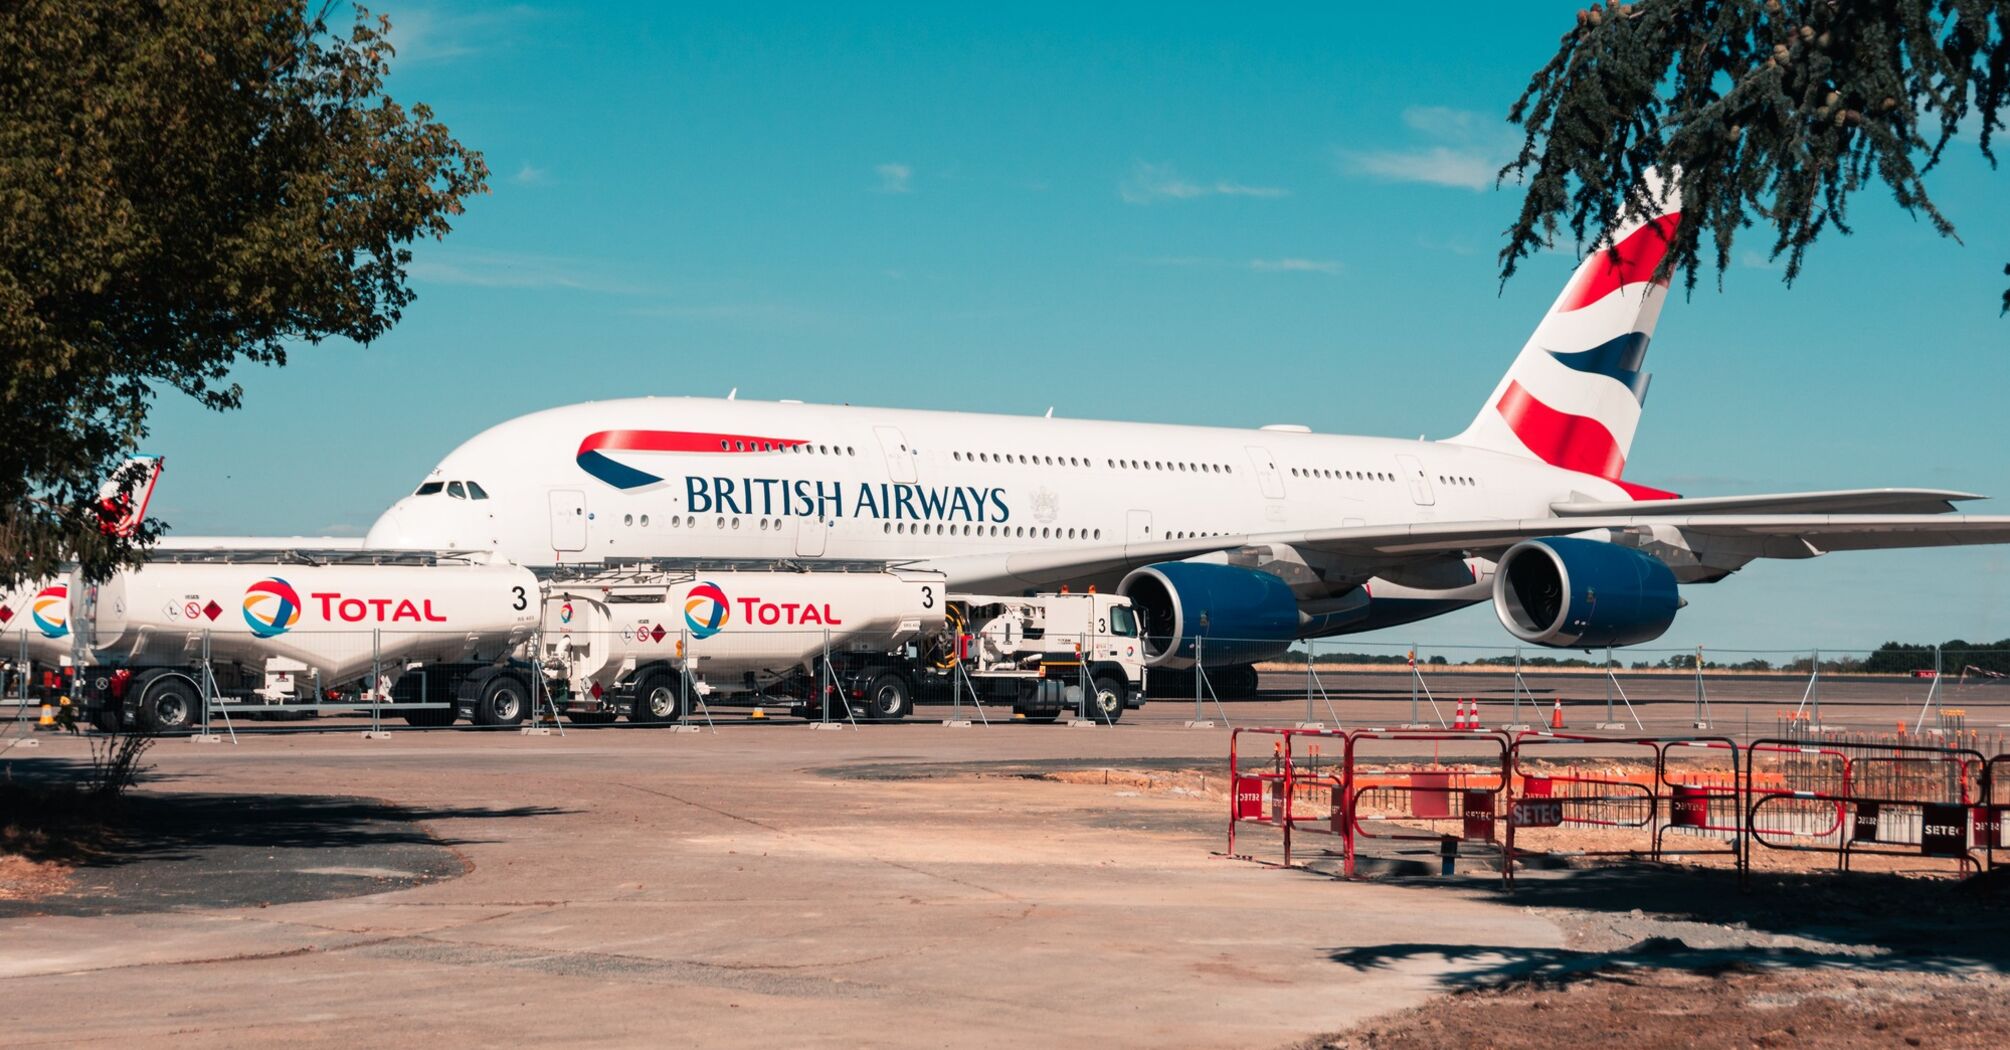 The British Airways plane was unable to take off on time from Italy due to incorrect seat cushions